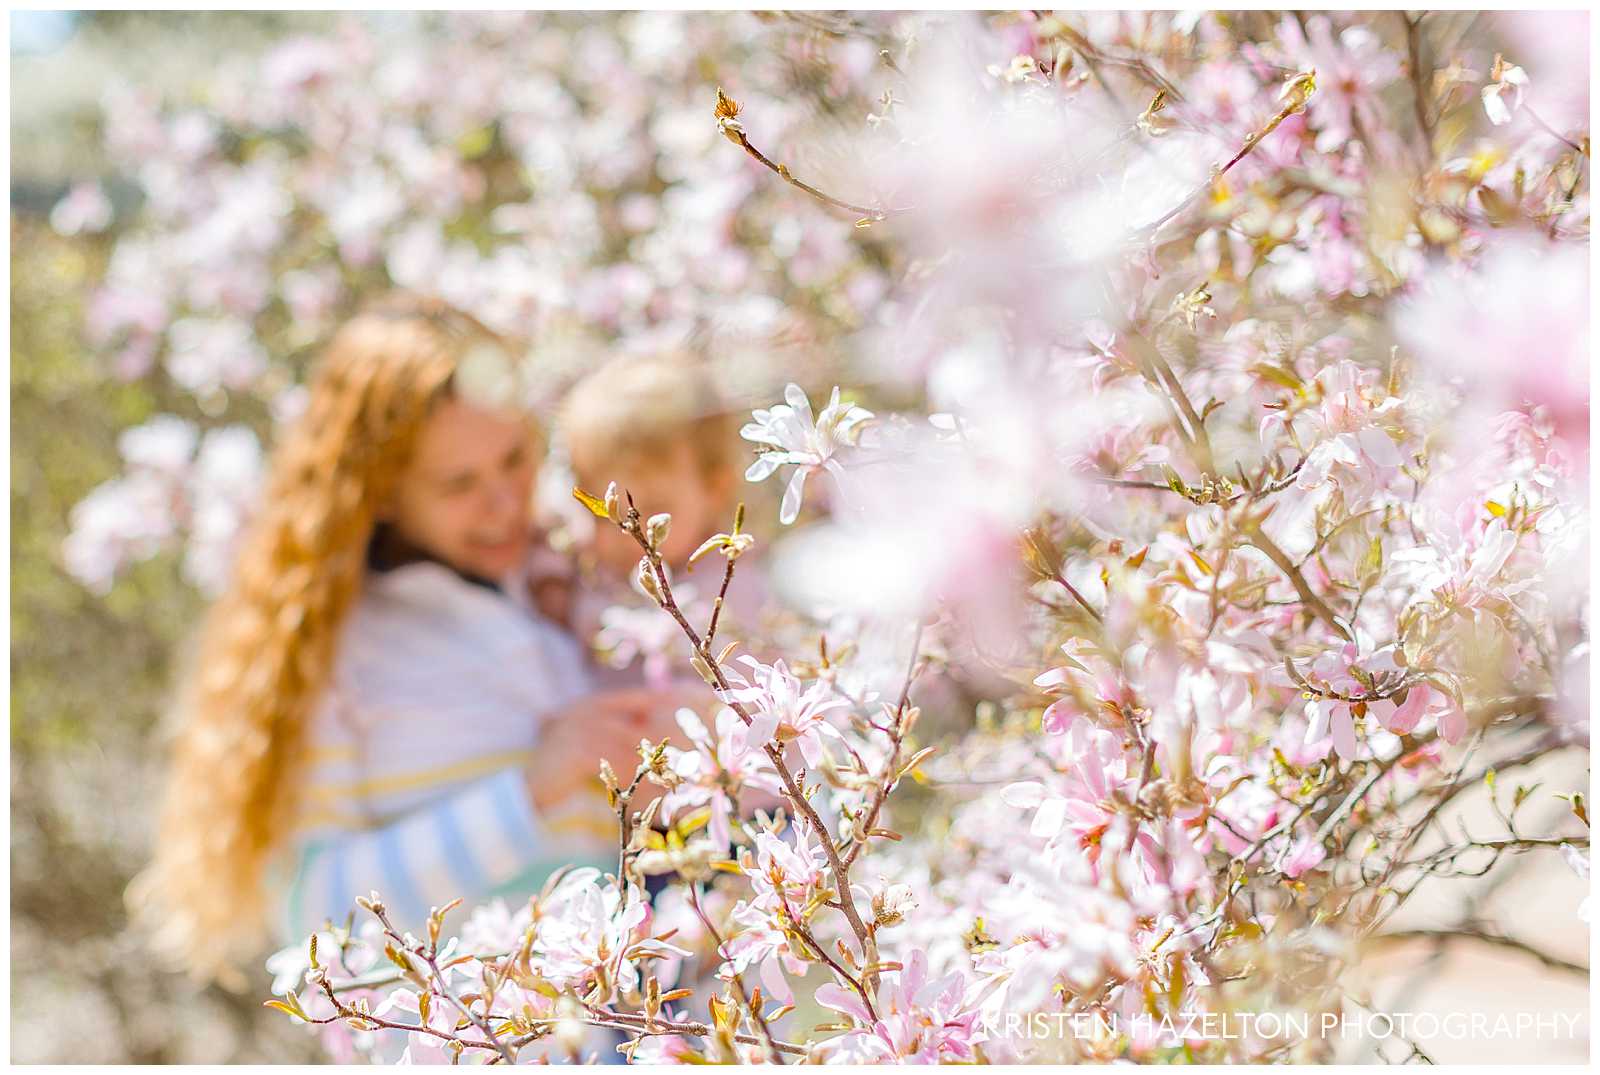 Photo of pink star magnolias with a mother and toddler daughter in the background